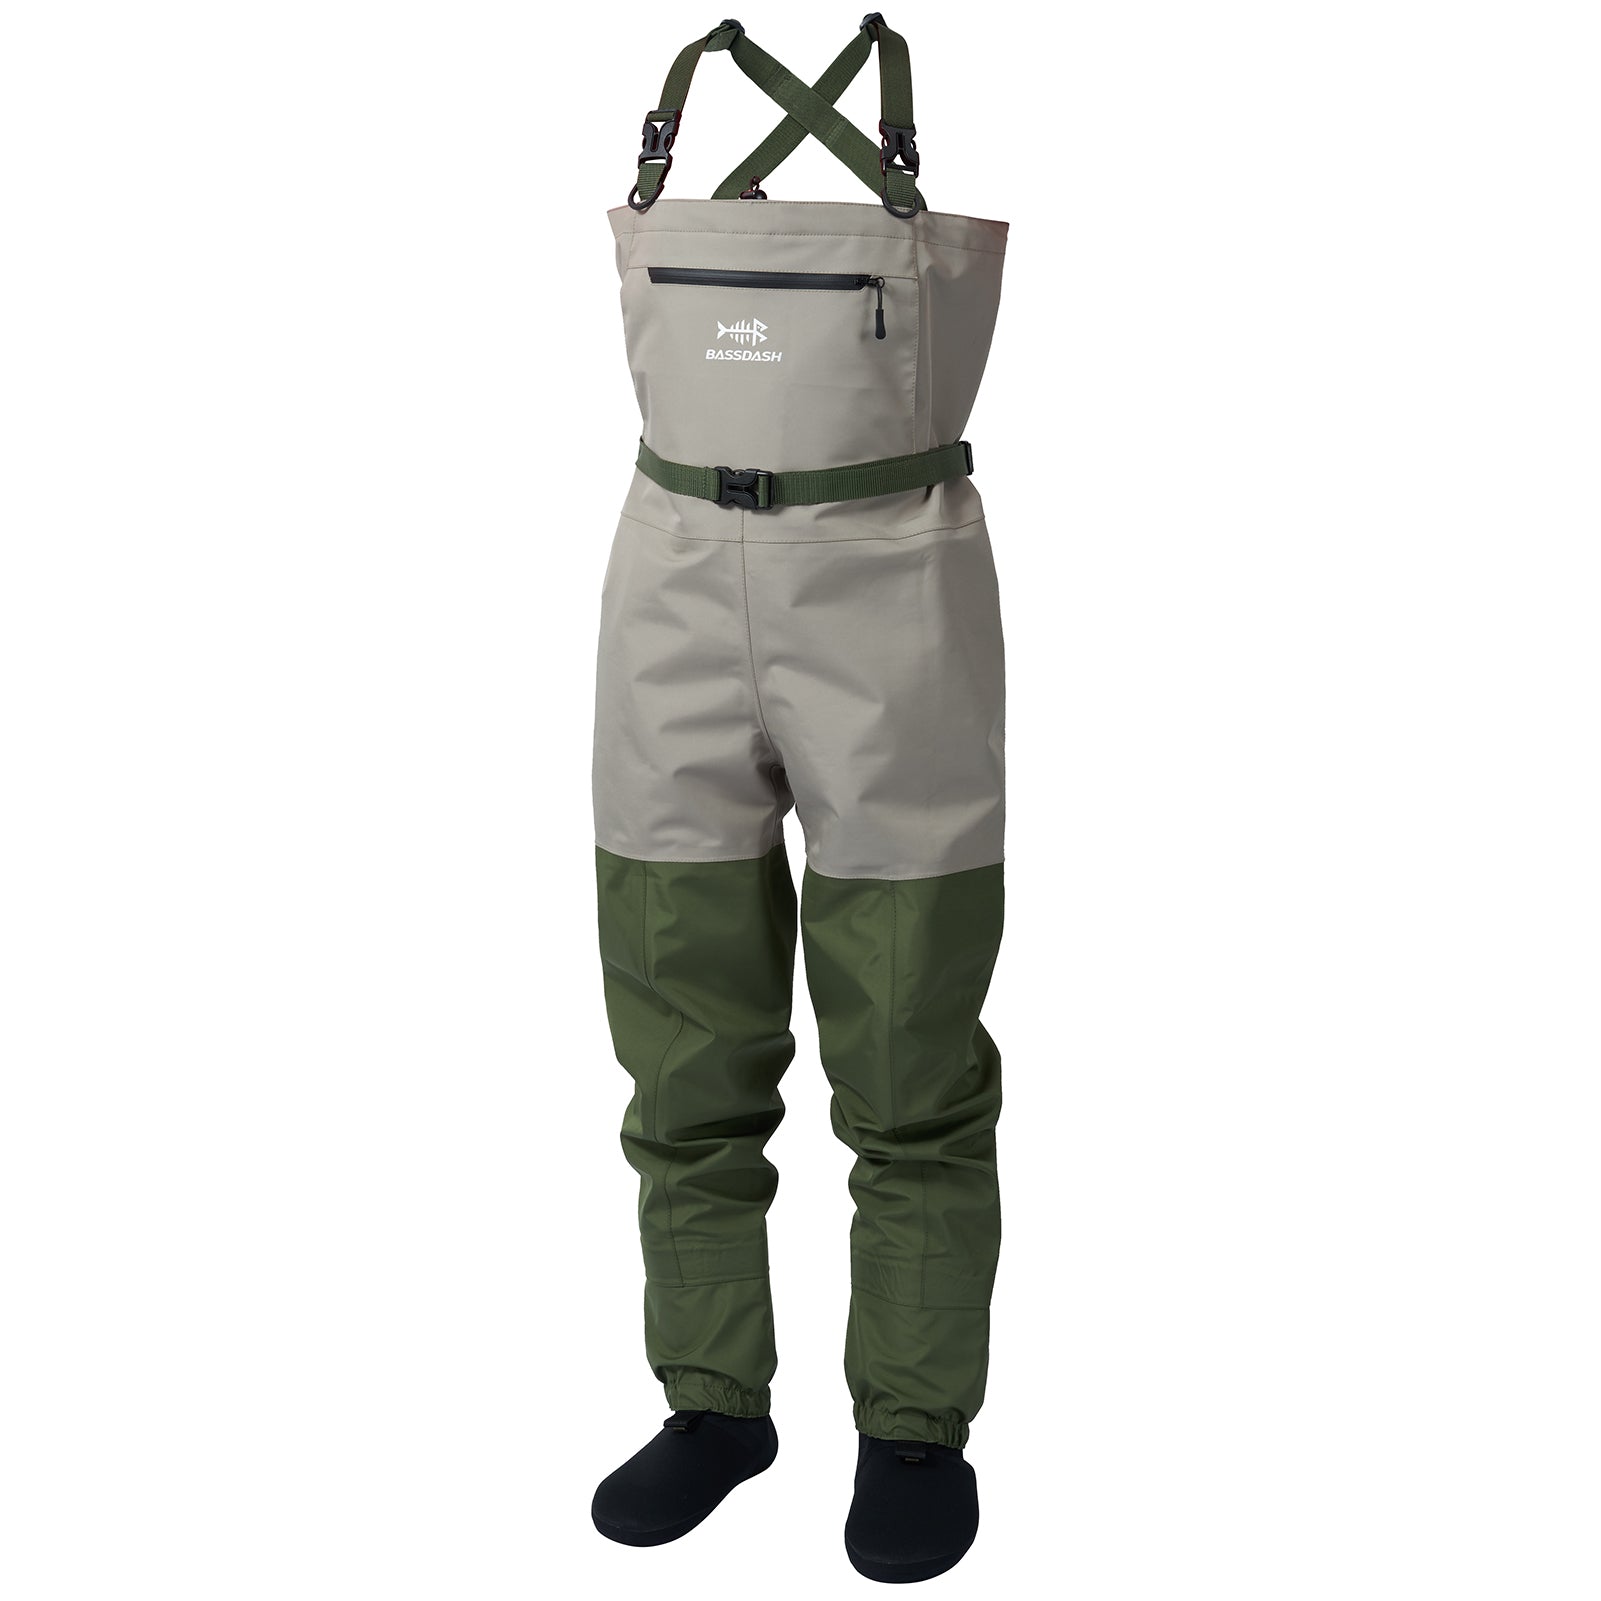 Kids IMMERSE Breathable Waders - Stocking Foot - Light Tan/Green / Small